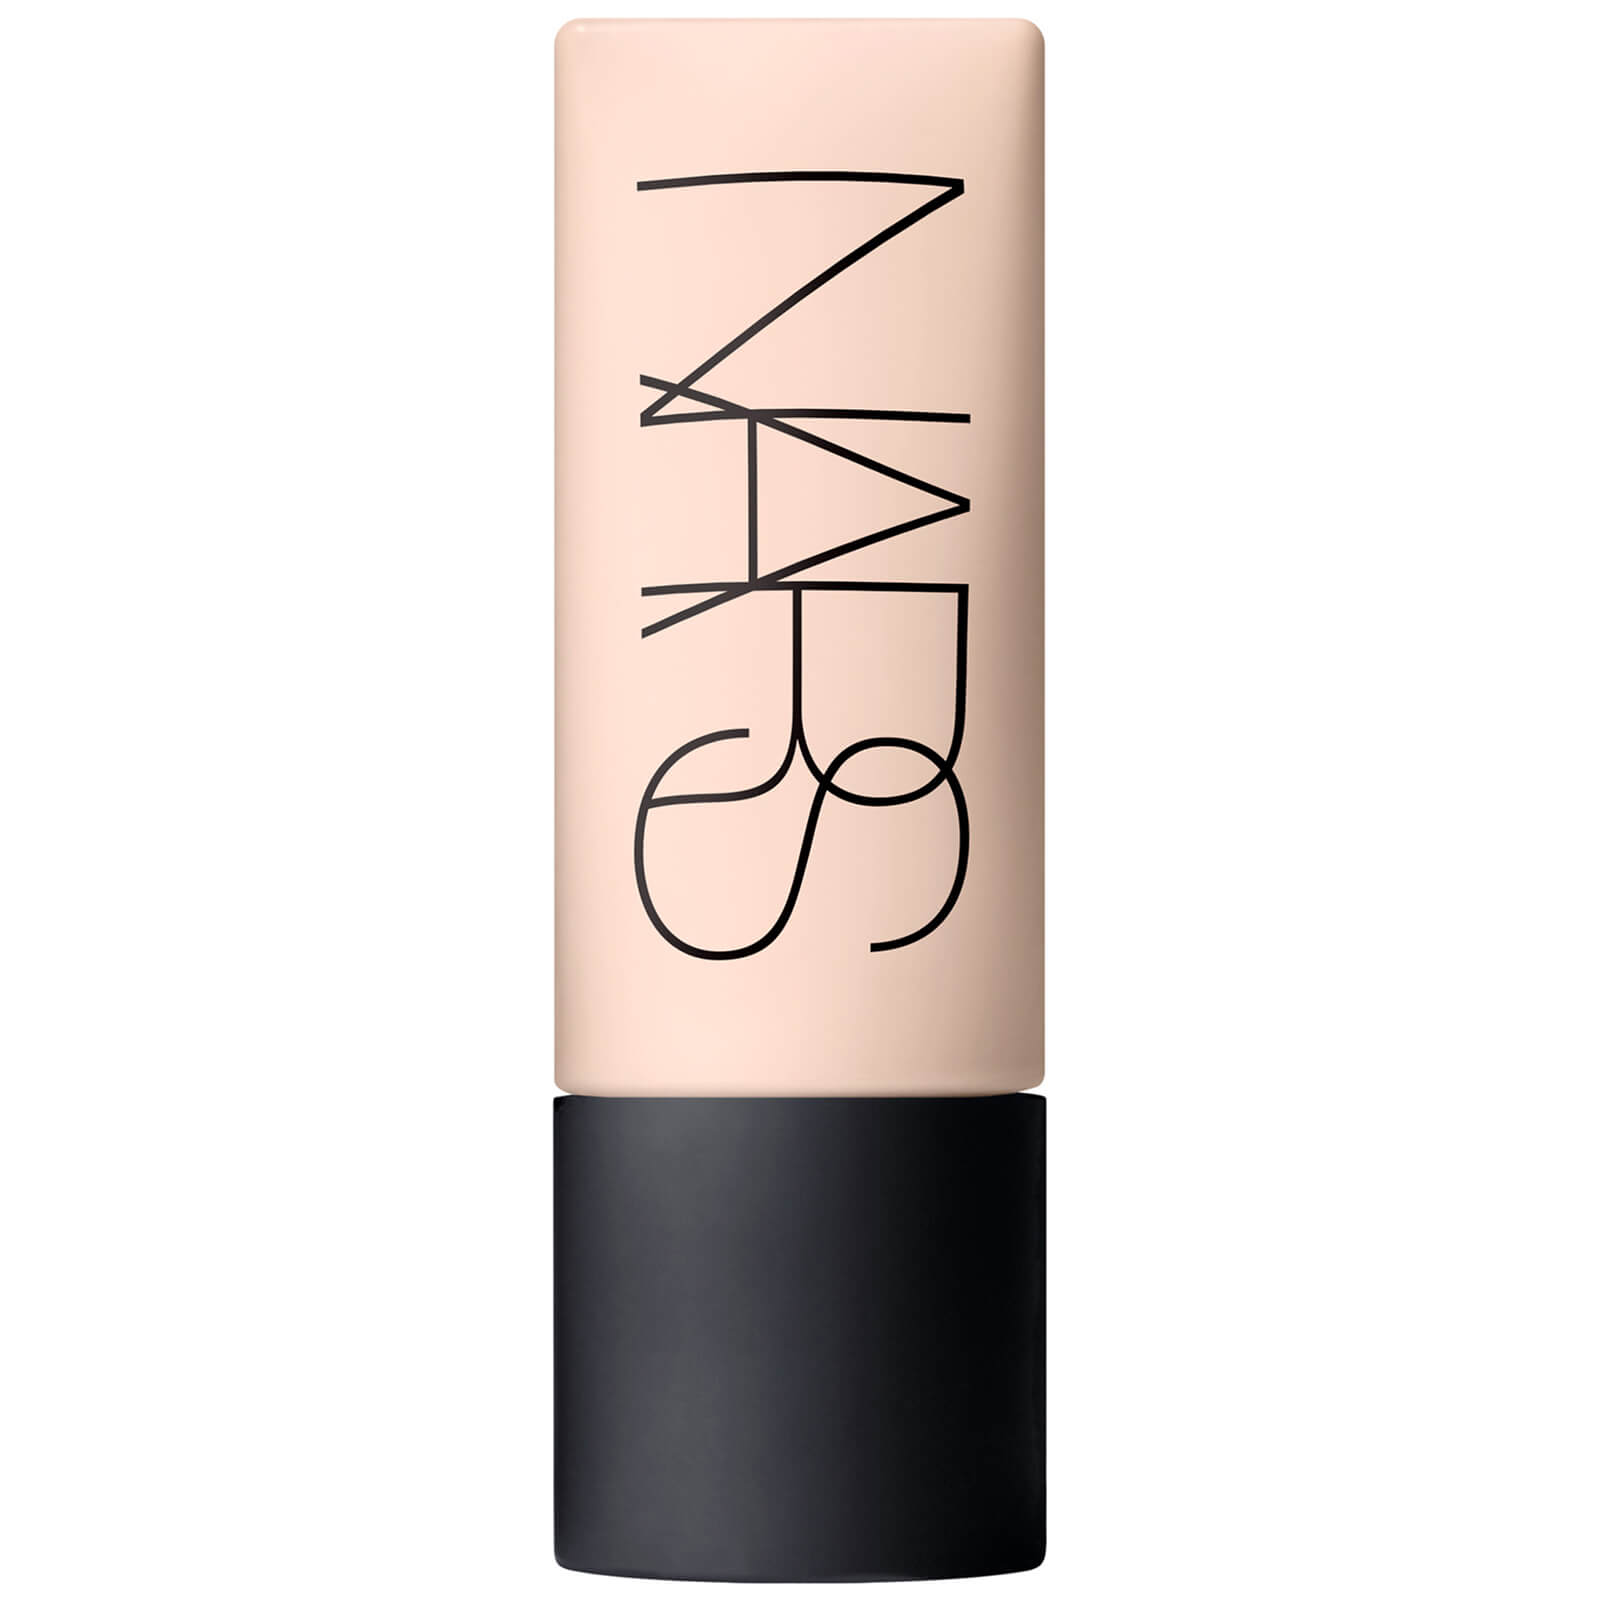 NARS Soft Matte Complete Foundation 45ml (Various Shades) - Oslo